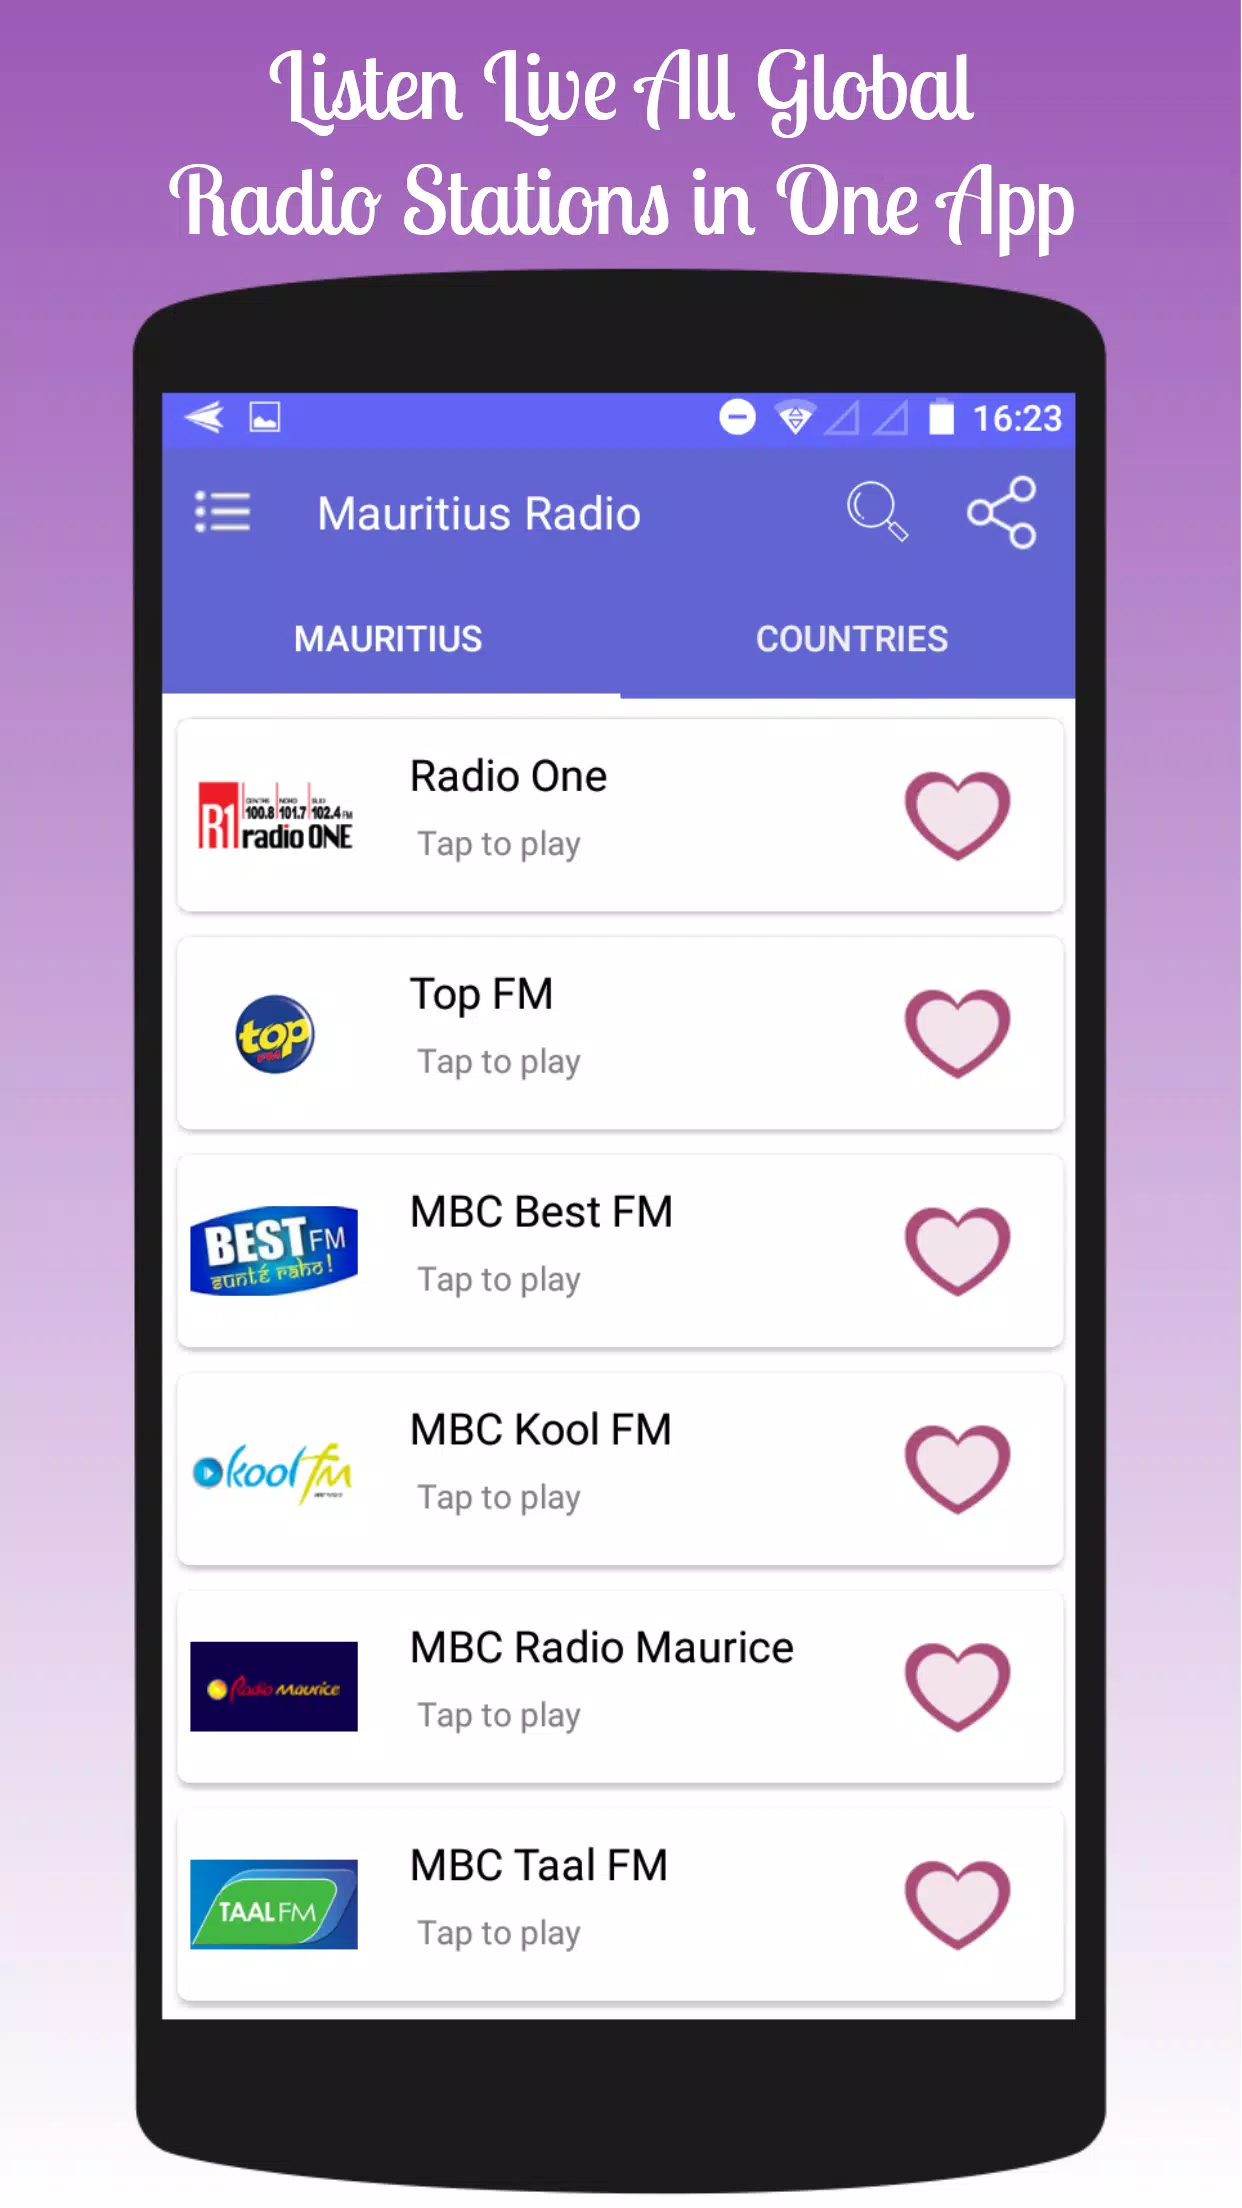 All Mauritius Radios in One App for Android - APK Download